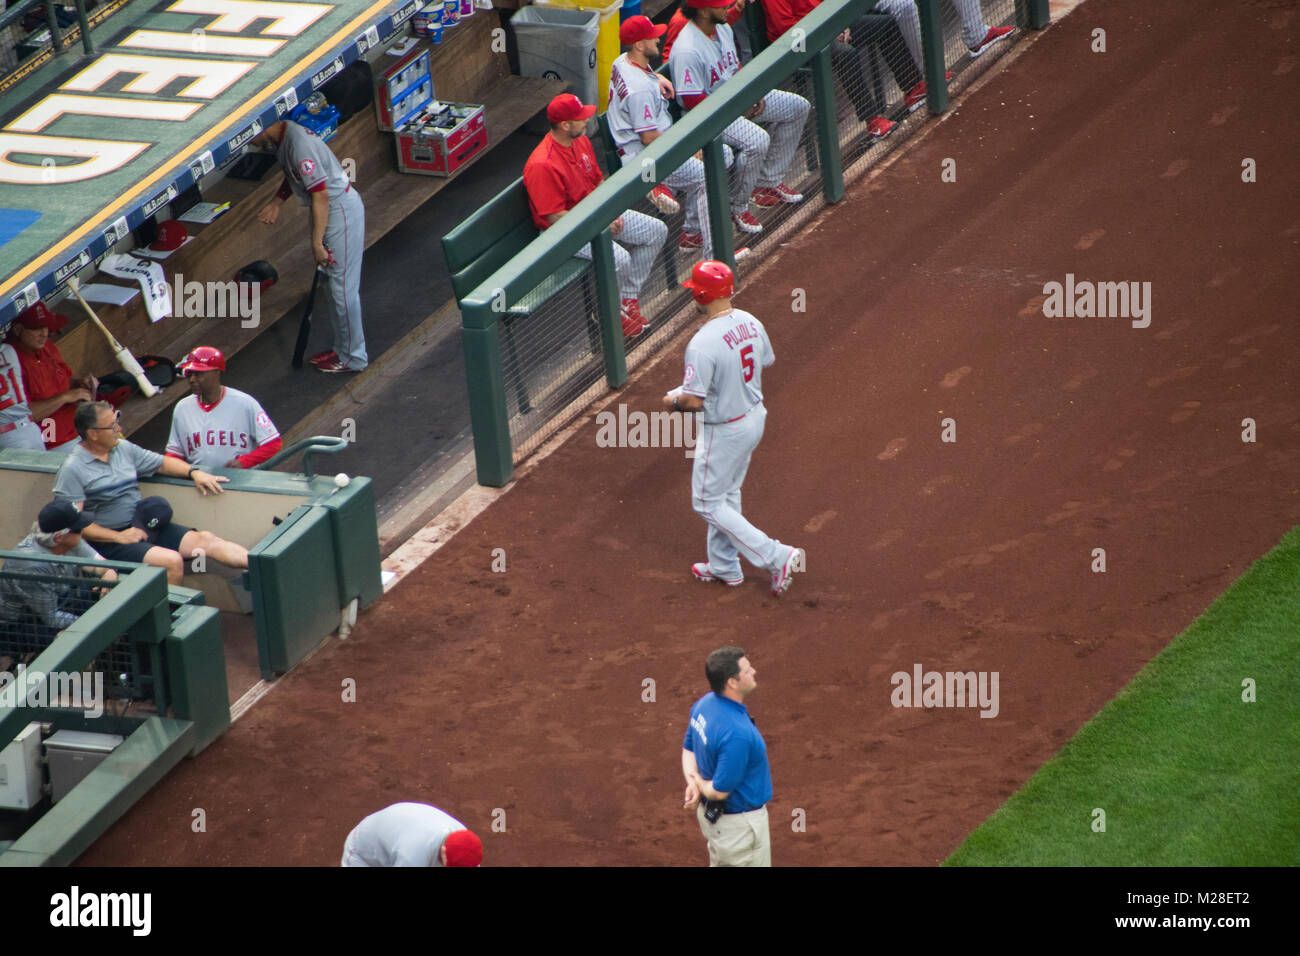 Albert Pujols from the Los Angeles Angels returns to dugout after his turn at bat against the Seattle Mariners. Stock Photo